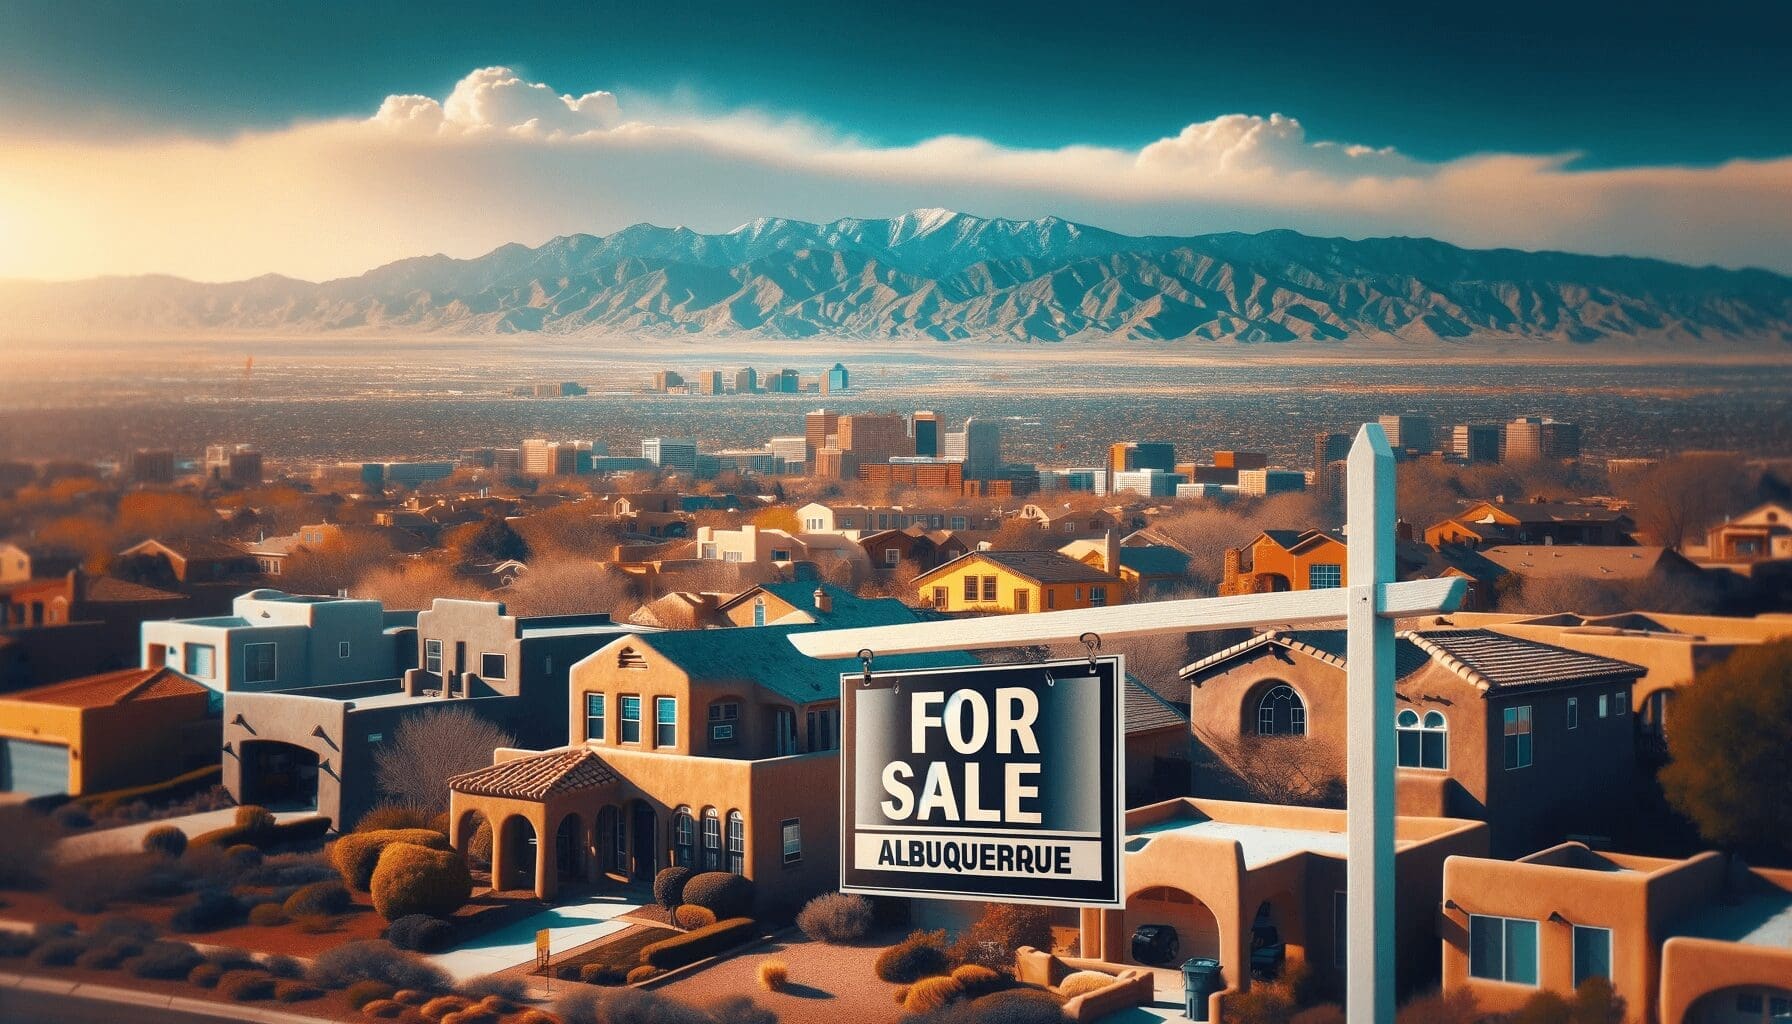 Albuquerque horizon with a FOR SALE sign in the foreground - Website Design